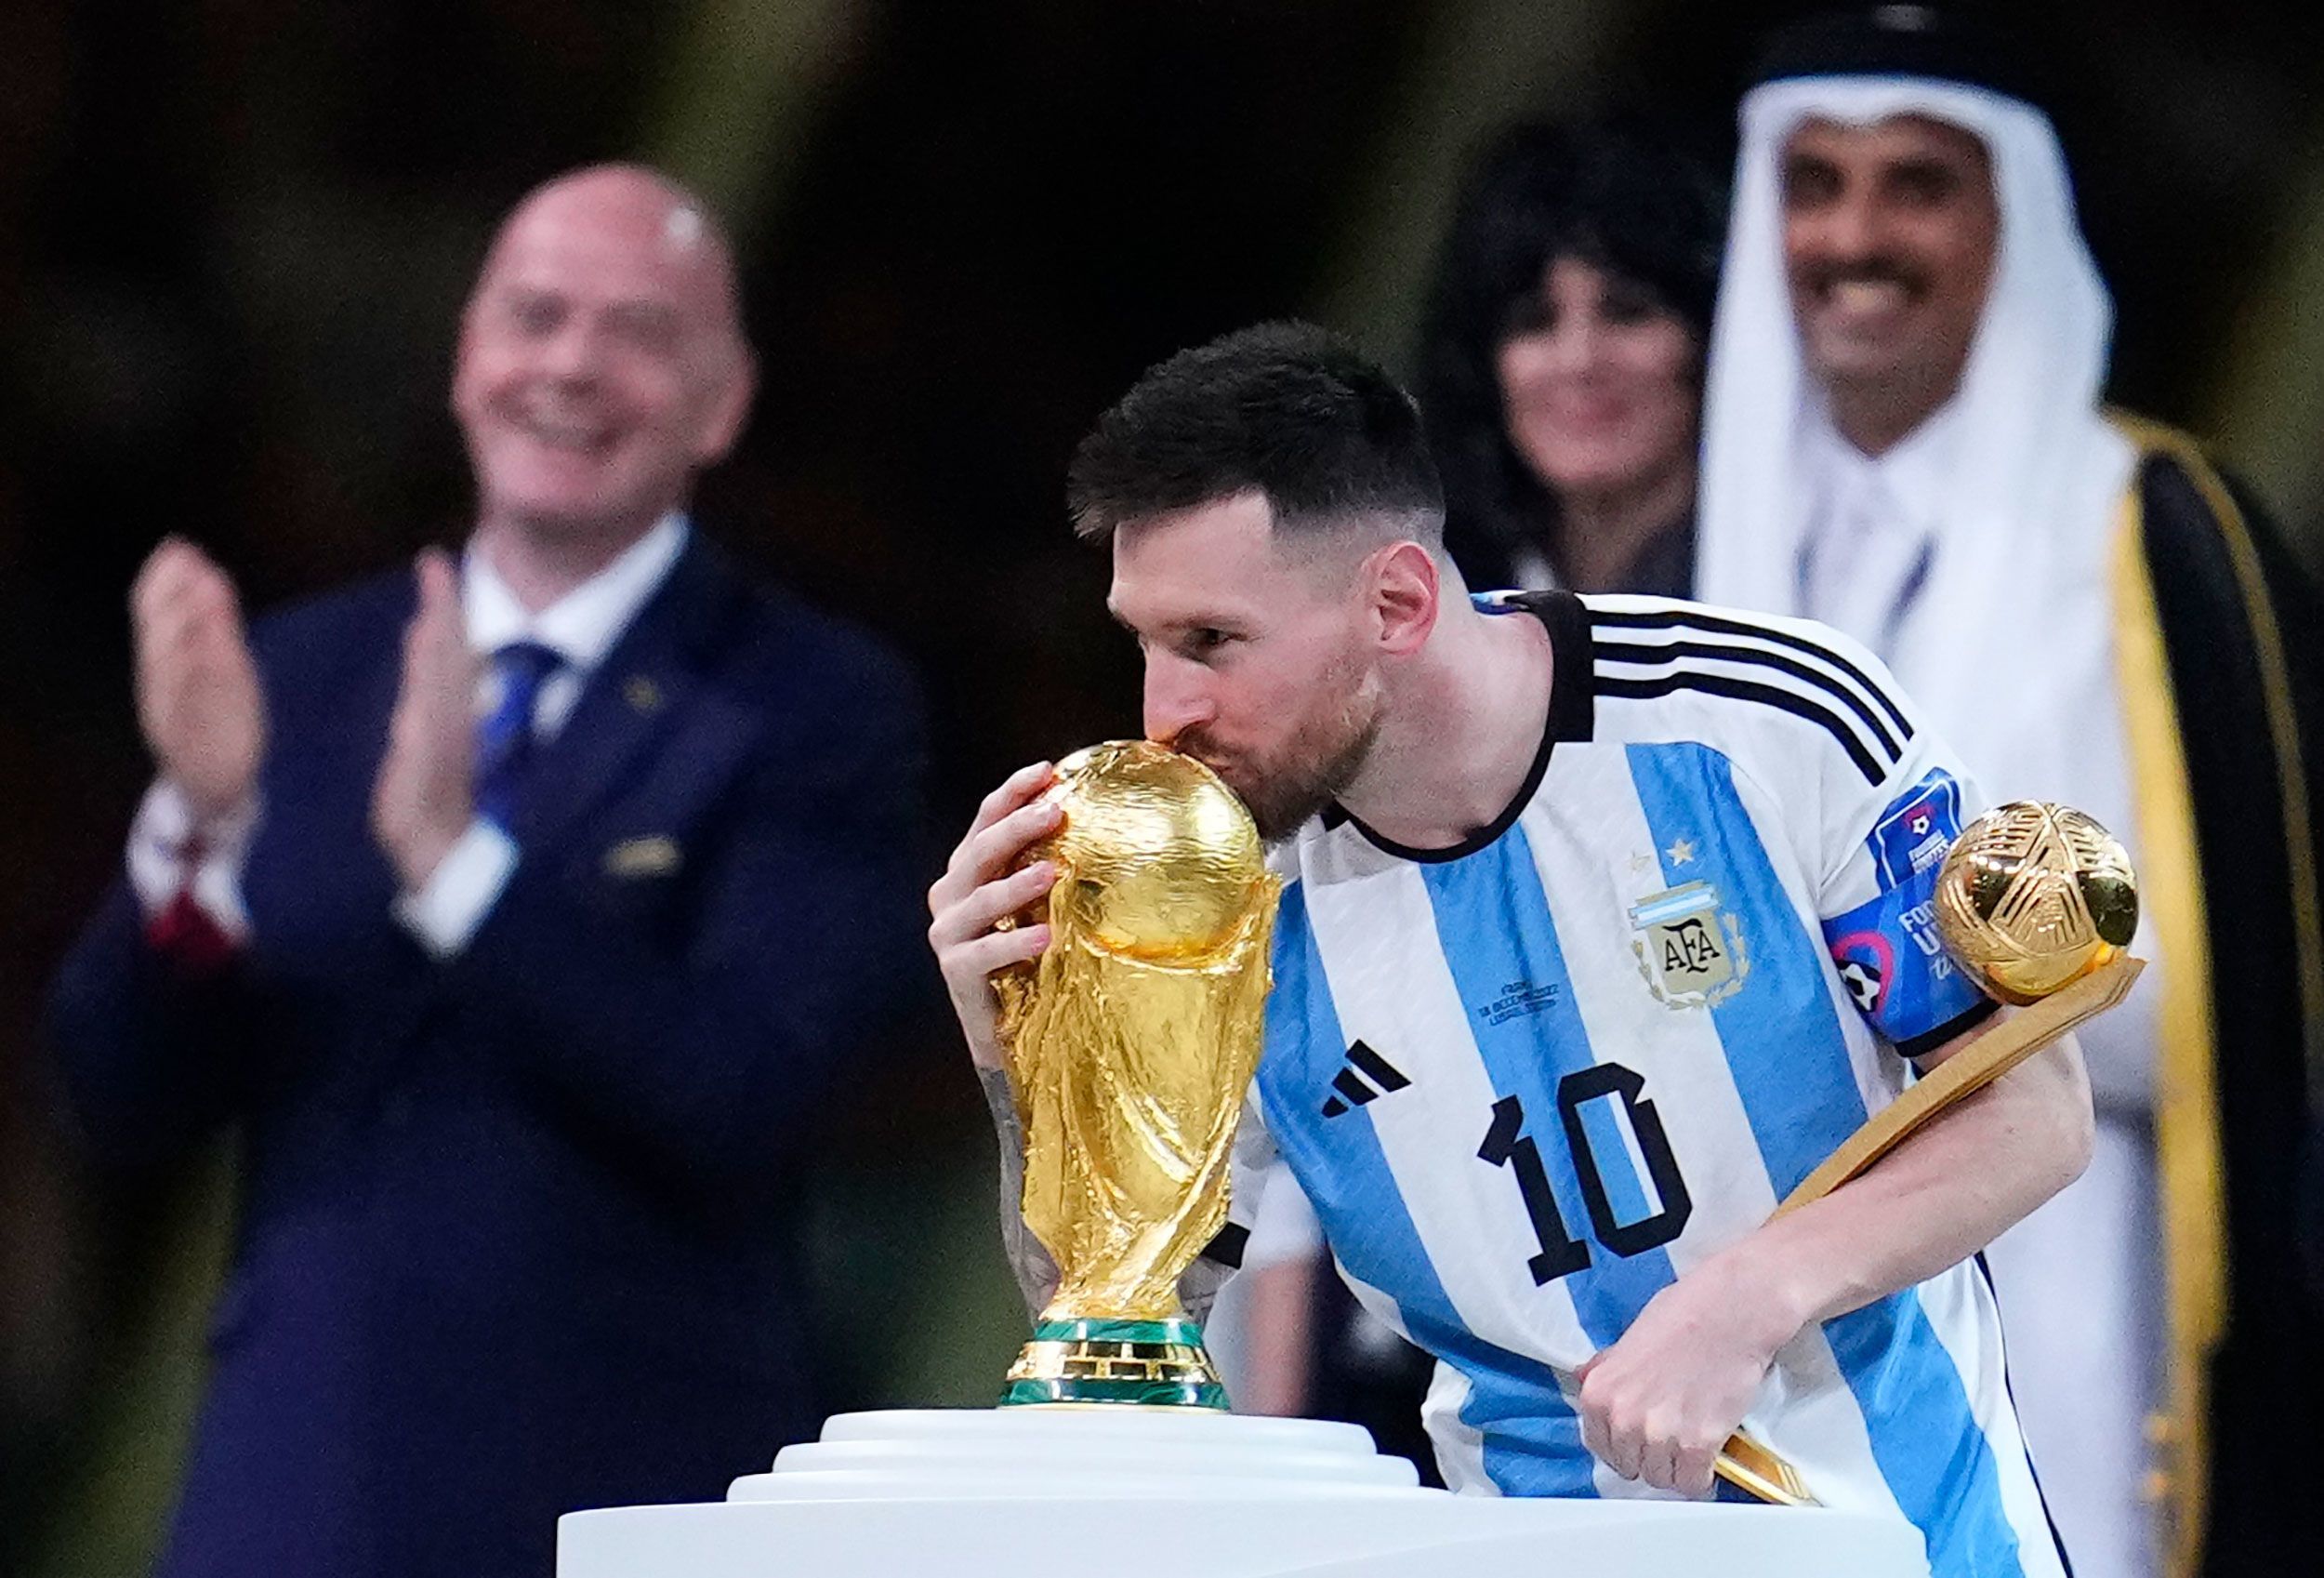 Journalist Morgan tells Messi that he went overboard in celebrating 2022 World Cup victory on social media